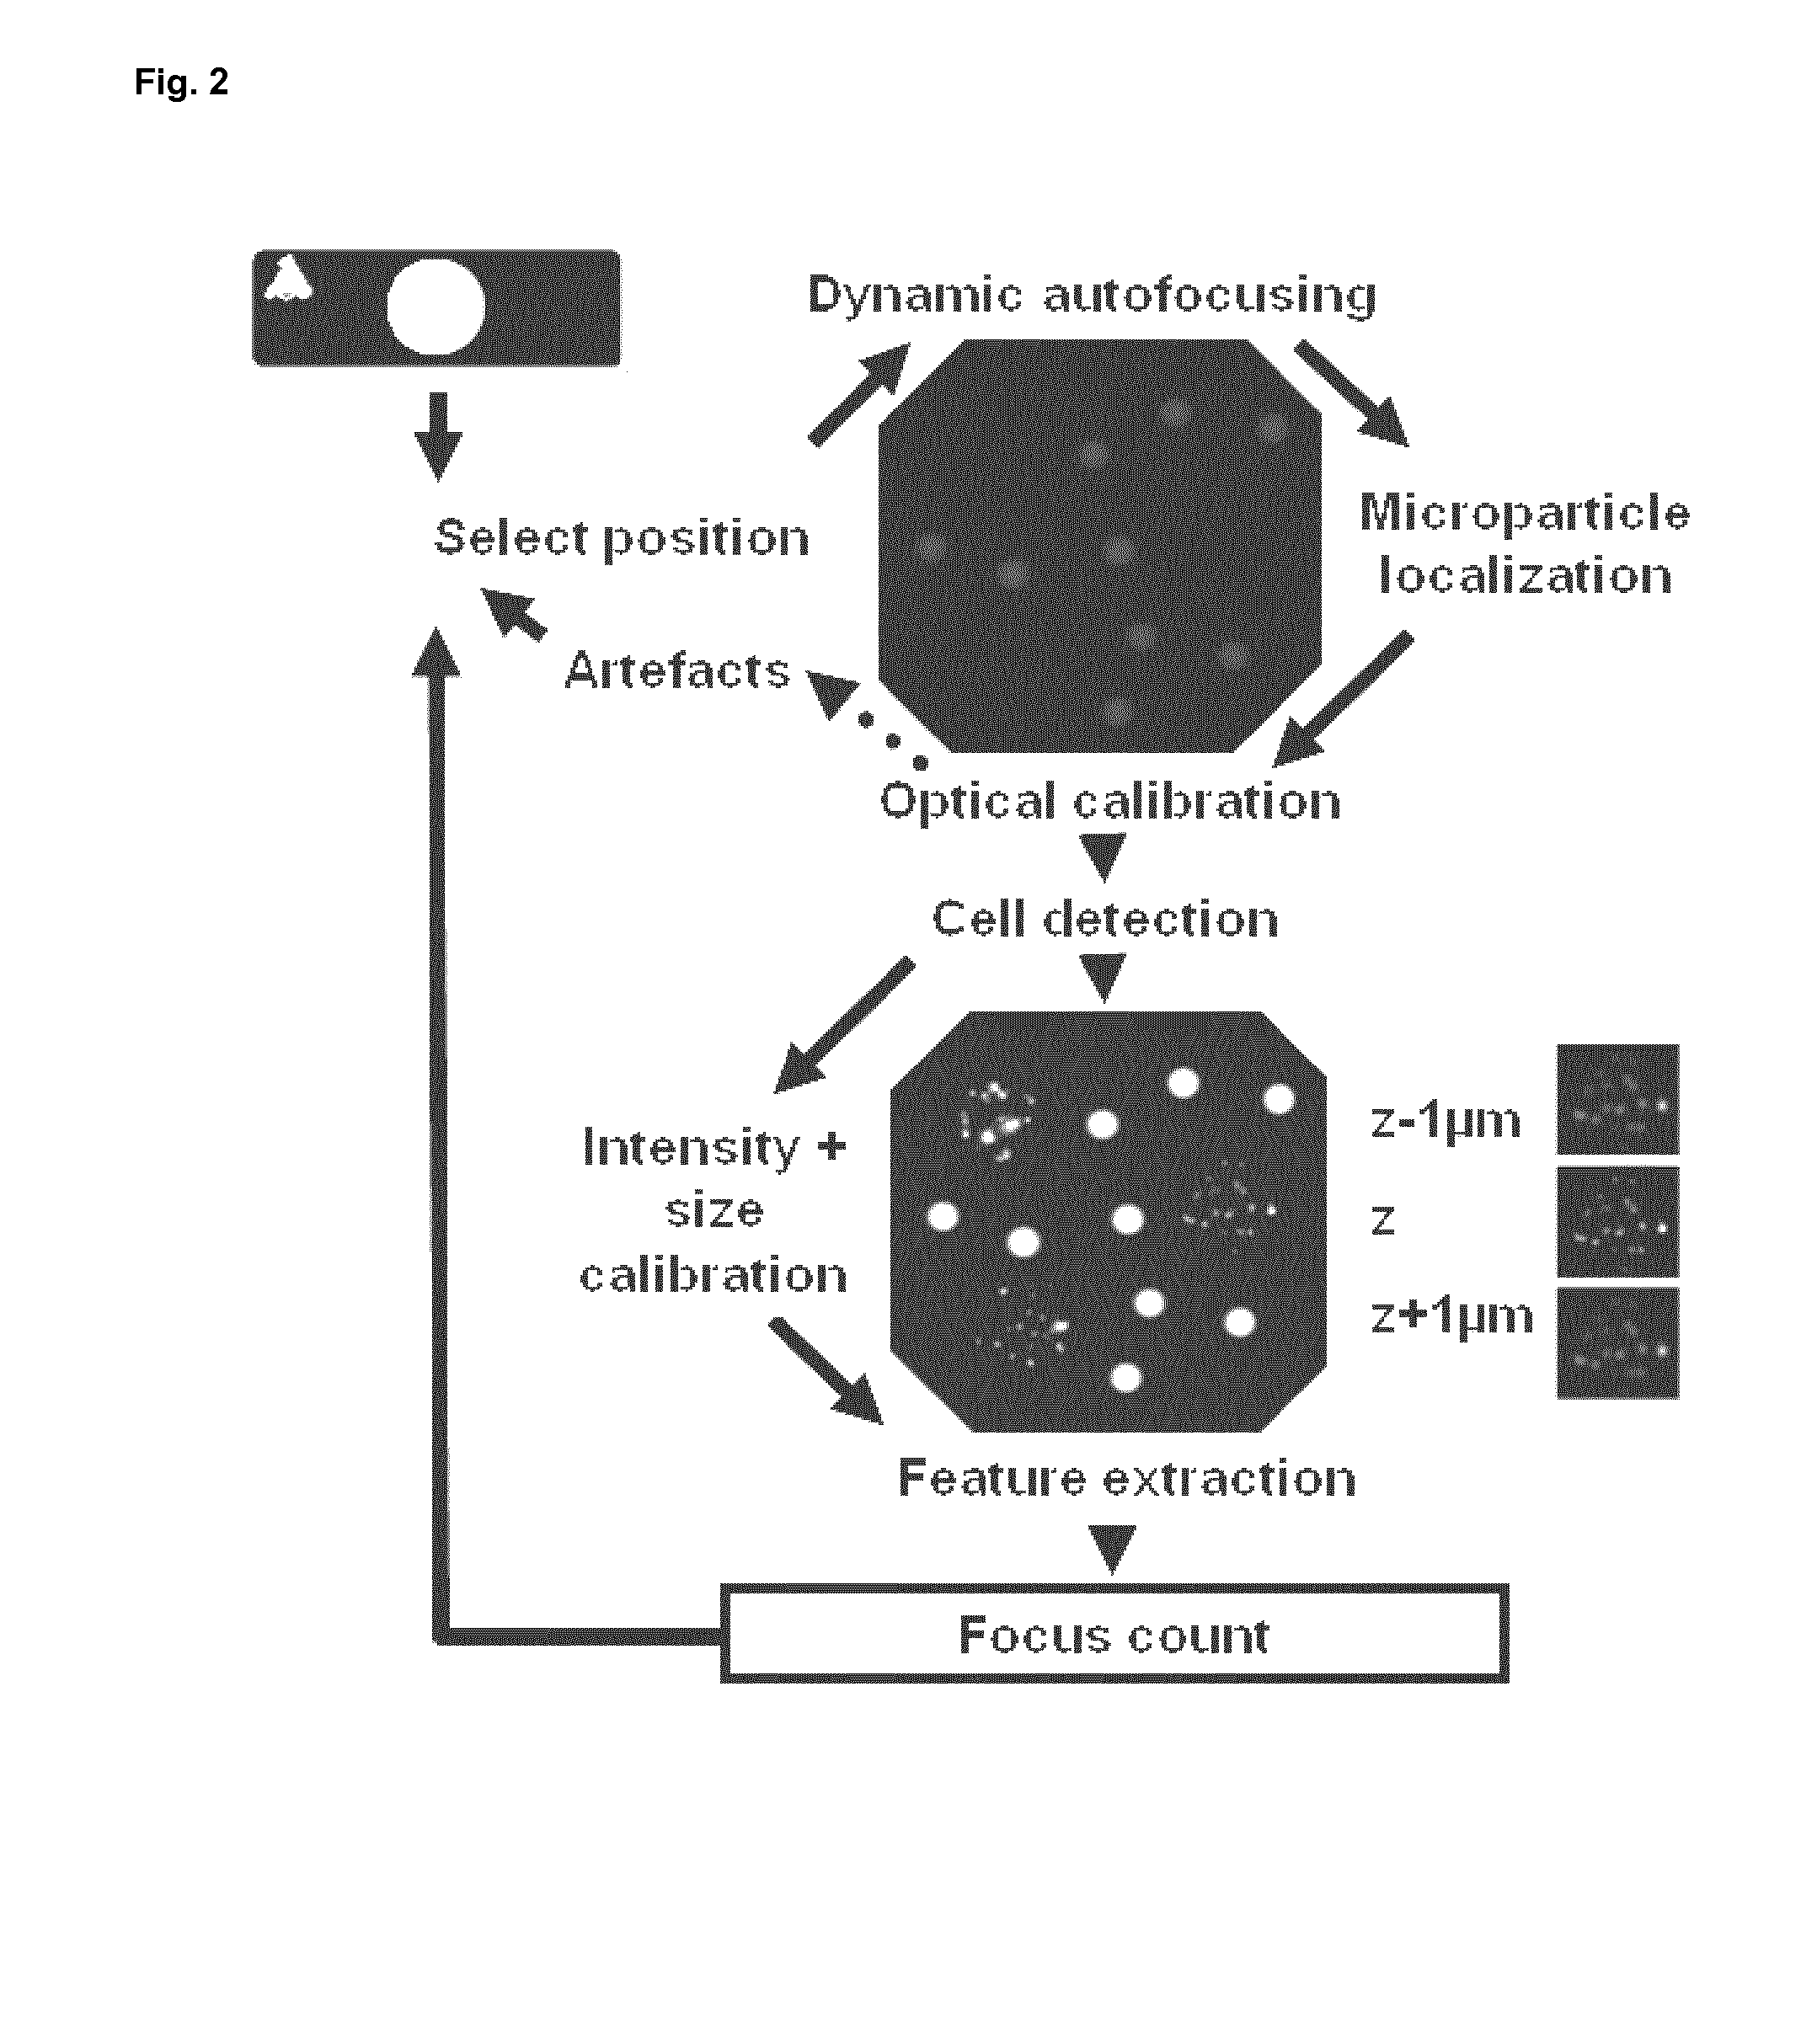 Methods and system for the automated determination of immunofluorescent foci using a cell-based immunofluorescence assay using synthetic calibration particles